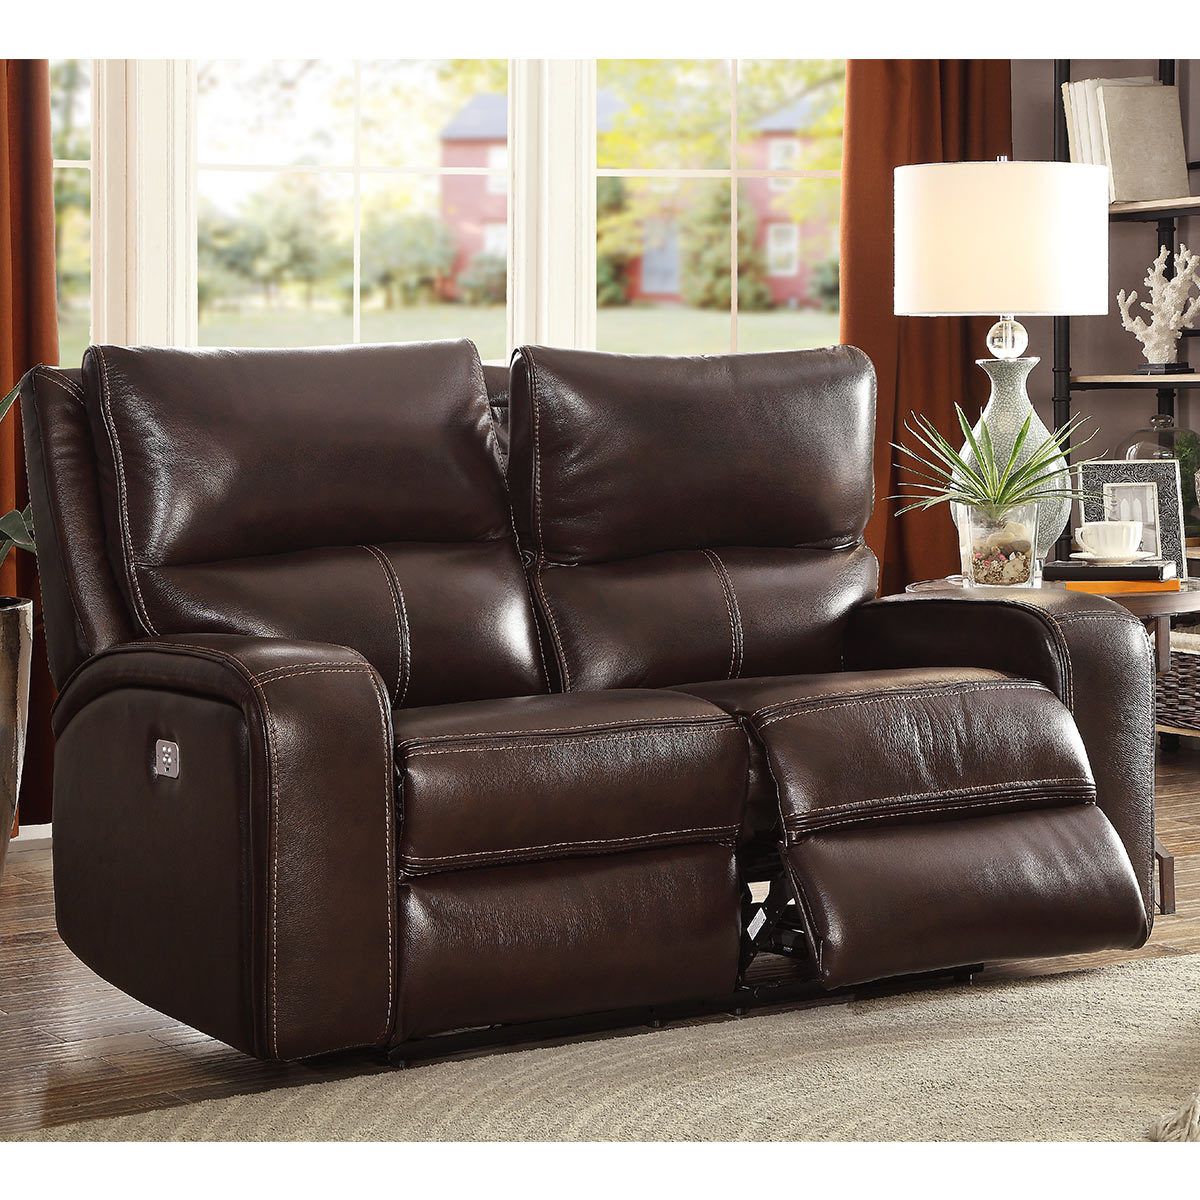 2 Seat Leather Reclining Sofa – Sofa Design Ideas In Contempo Power Reclining Sofas (View 14 of 15)